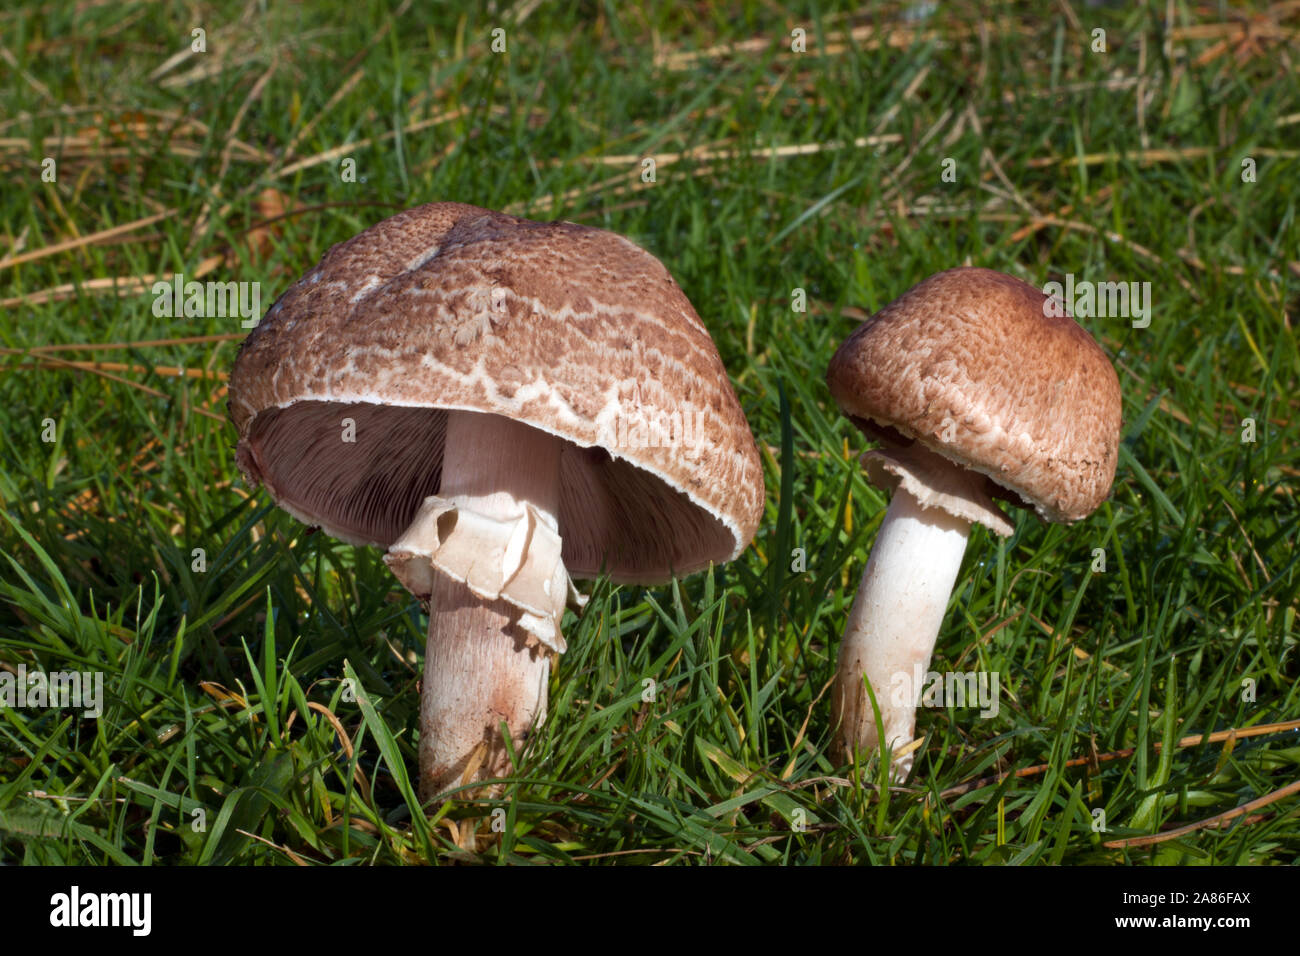 Agaricus subperonatus is a widespread, saprobic fungus often occurring in groups on tree-shaded, humus-rich ground and on woodland edges. Stock Photo